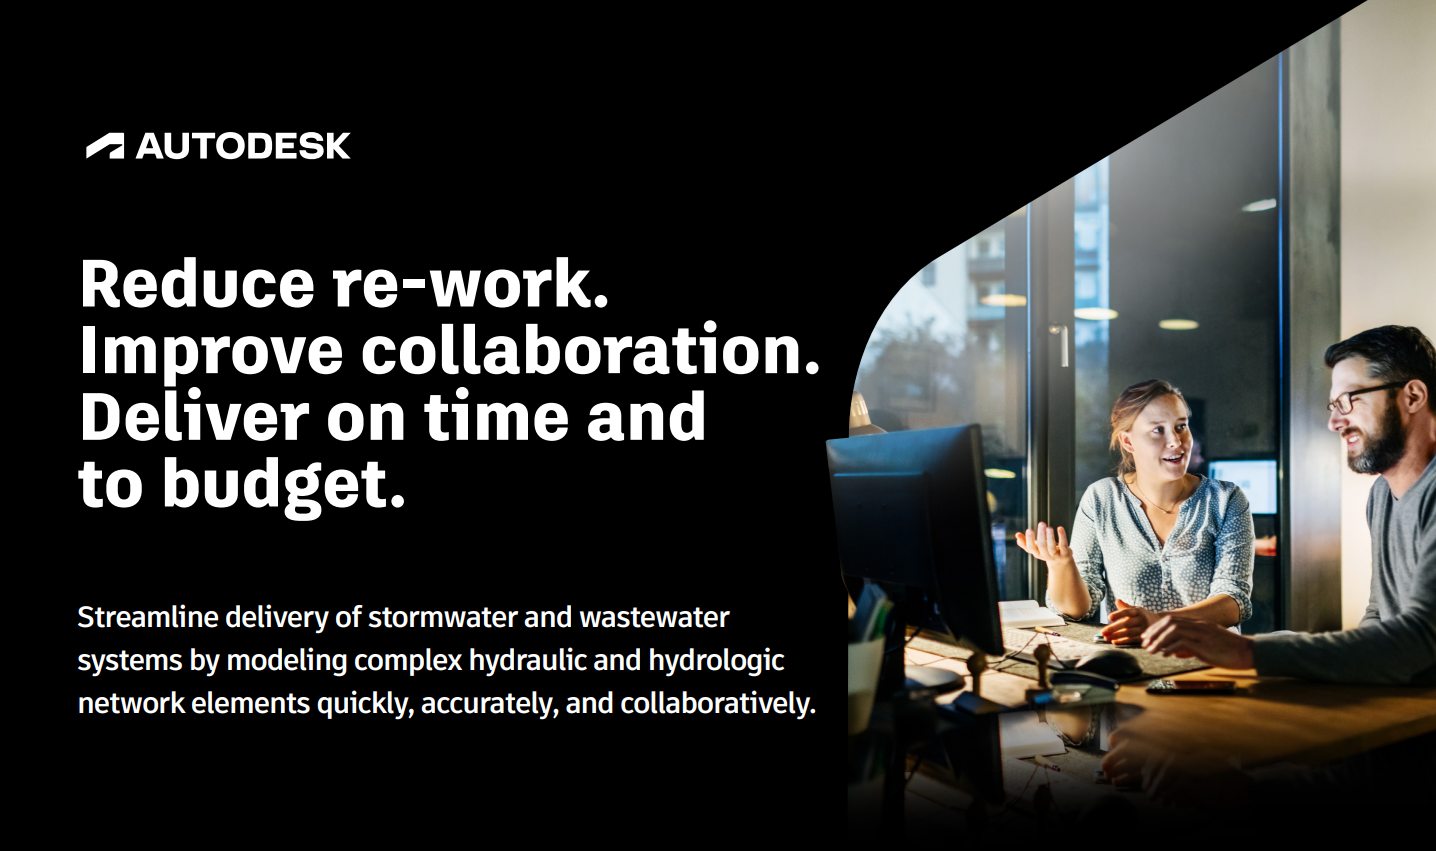 Reduce re-work. Improve collaboration. Deliver on time and to budget.